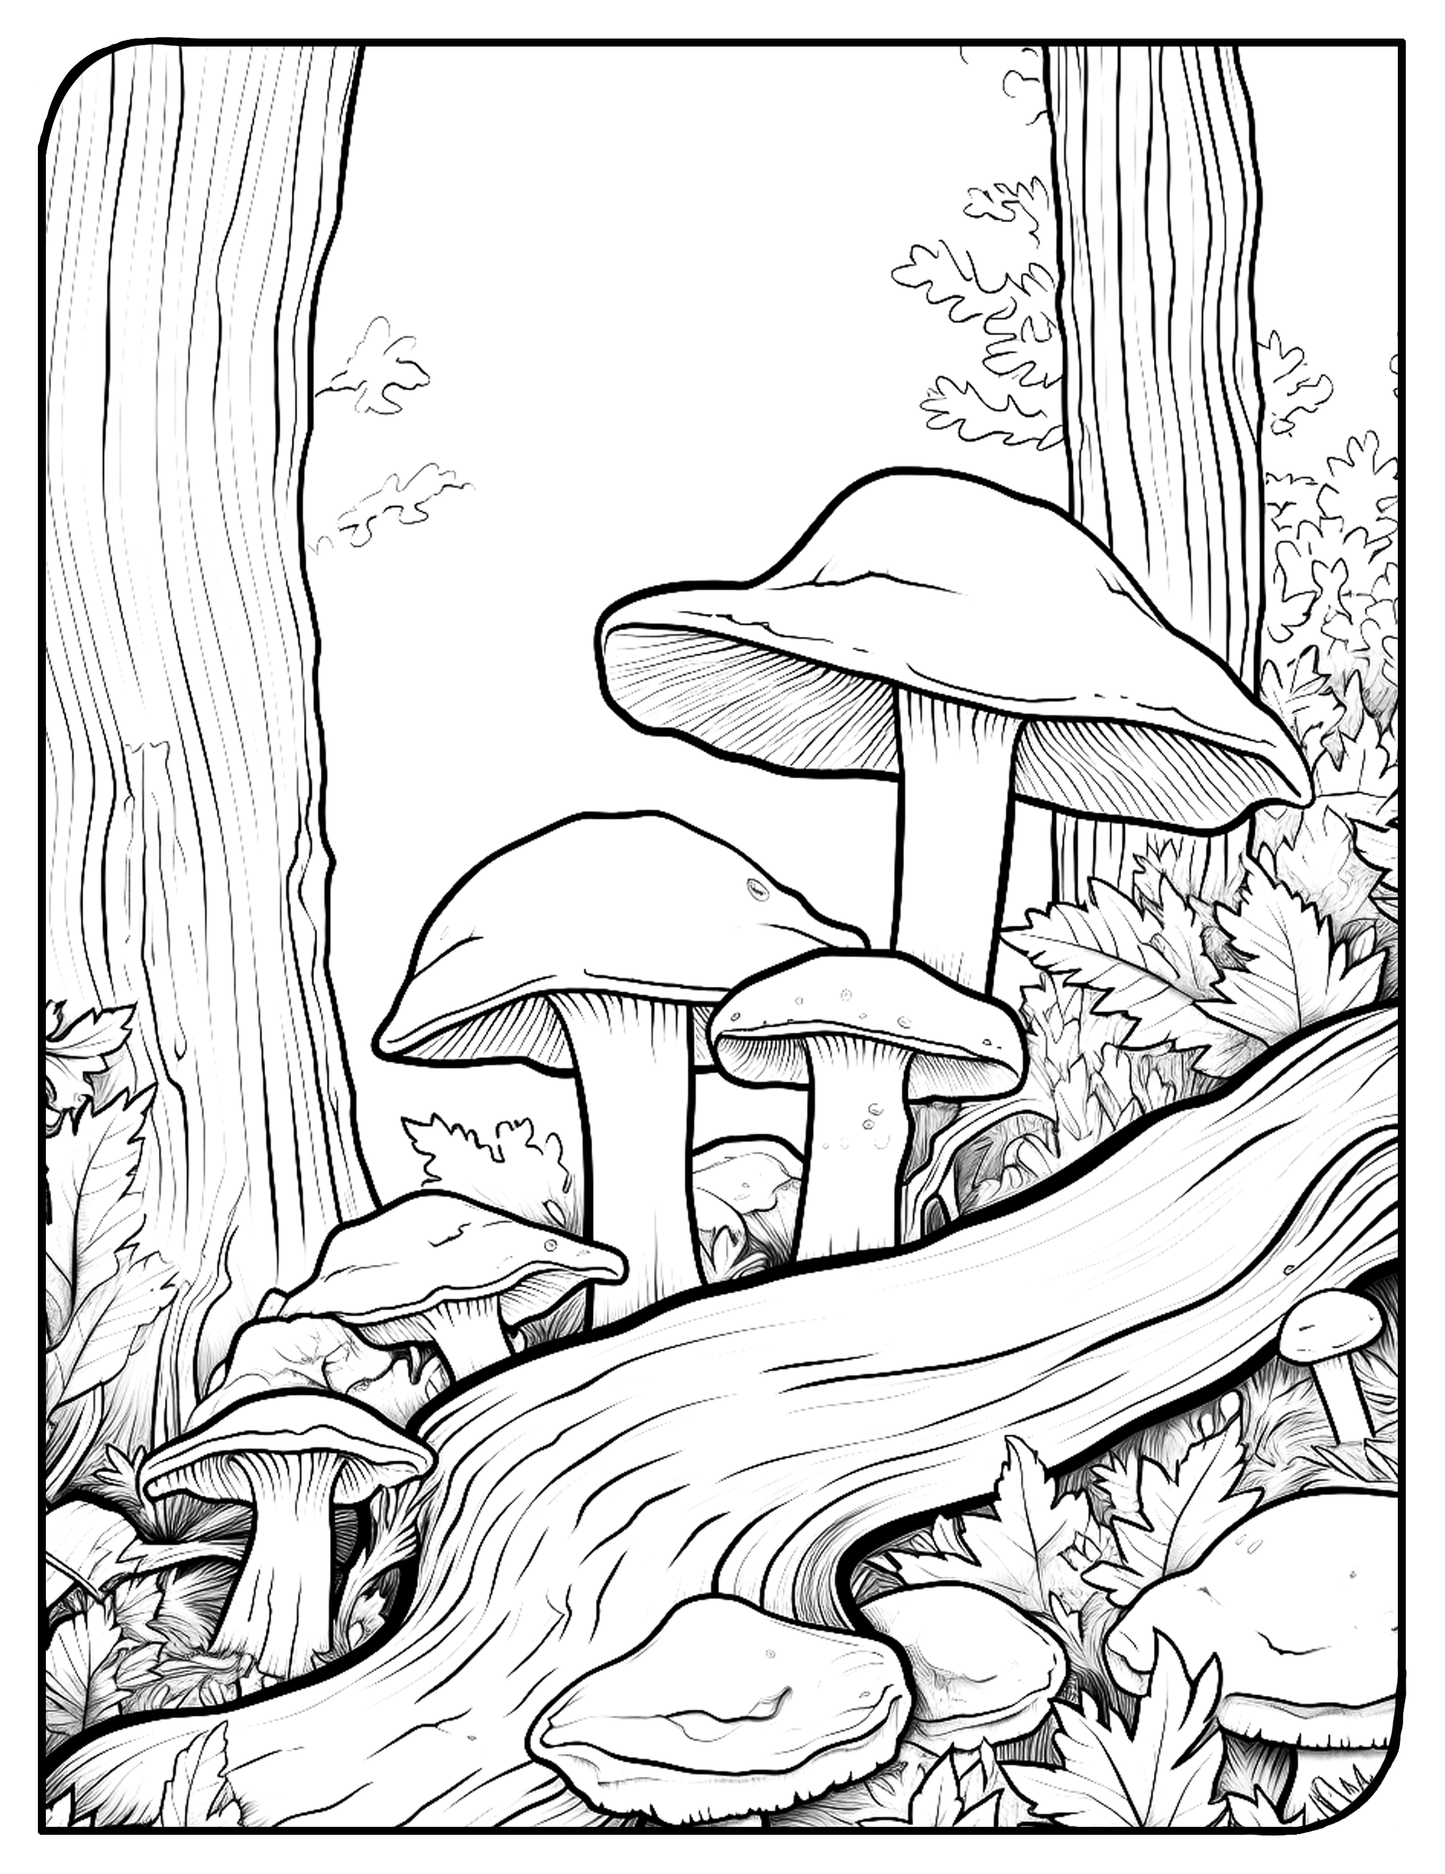 MUSHROOMS: Coloring Book for Adults